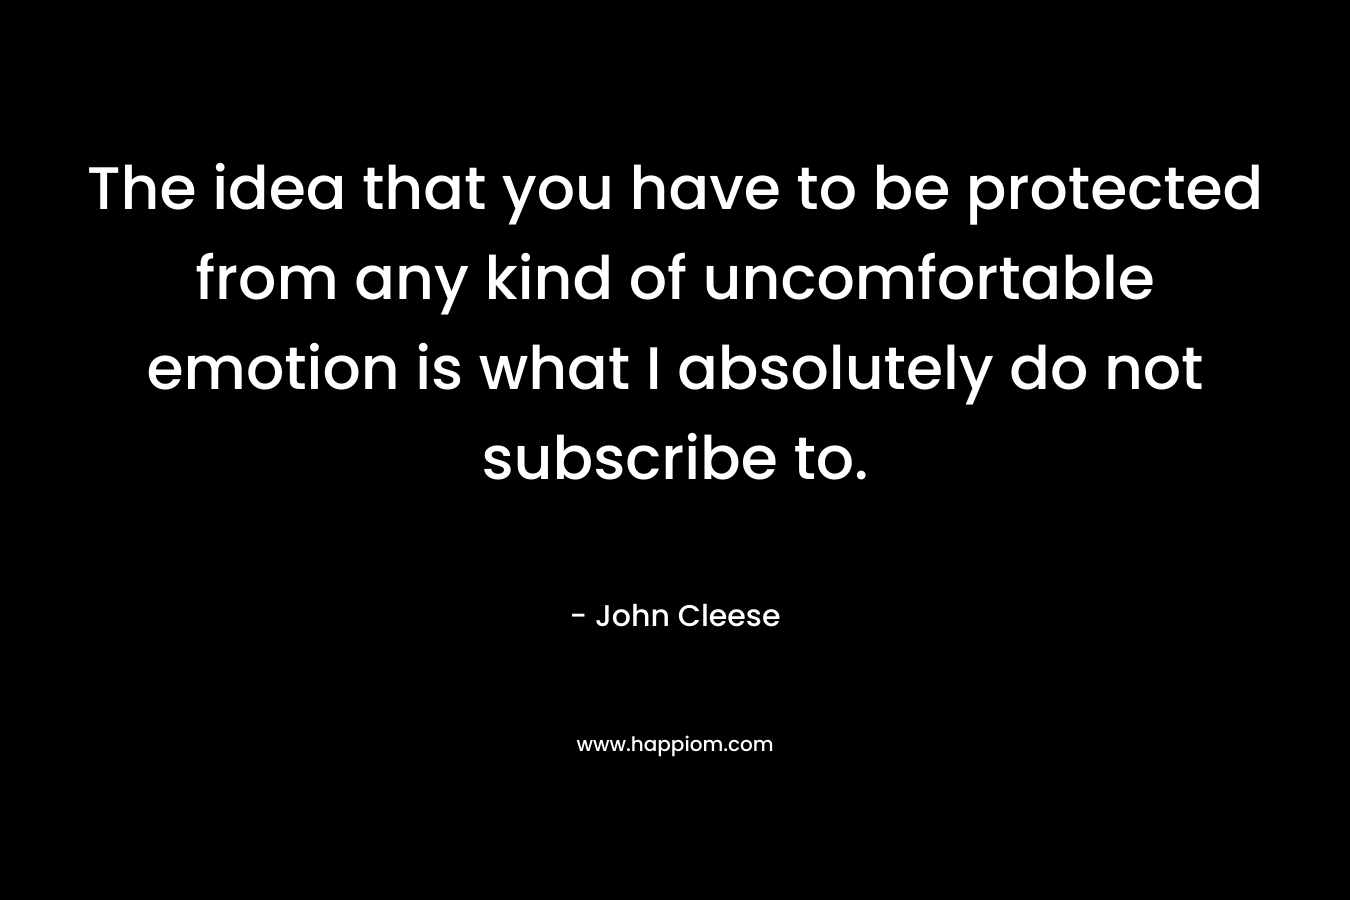 The idea that you have to be protected from any kind of uncomfortable emotion is what I absolutely do not subscribe to.